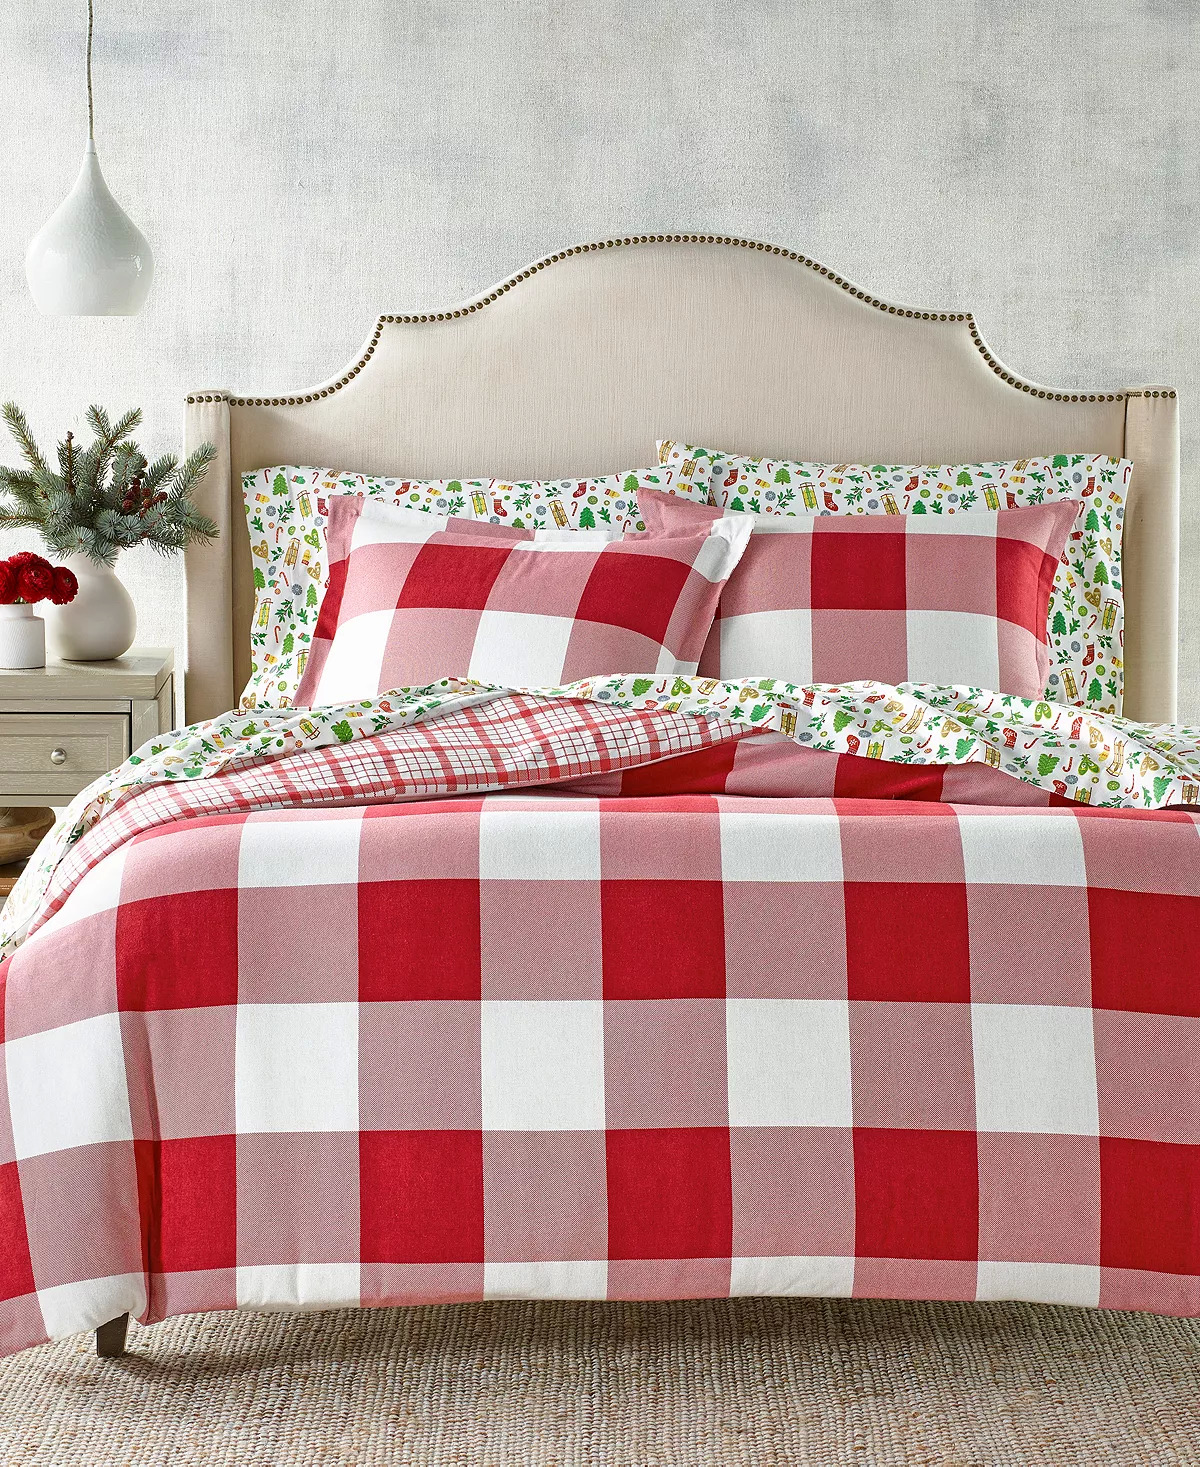 Charter Club Flannel 100% Cotton Duvet Cover (Full/Queen, Red Check) $15.93 King $19.93 + Free Store Pickup at Macy's or F/S on $25+